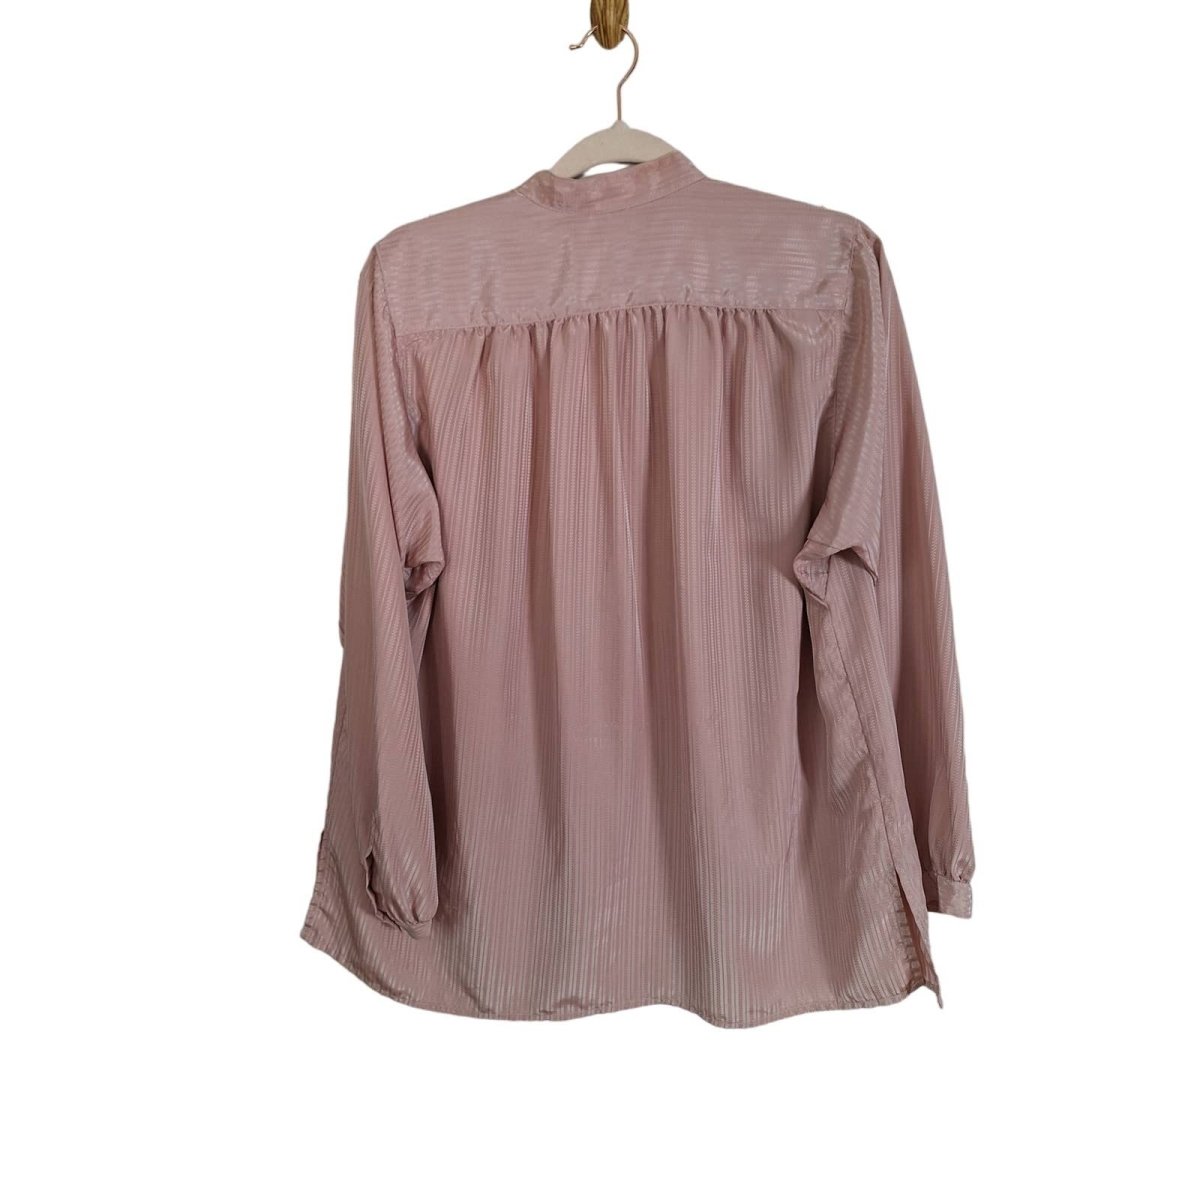 Vintage 80s Dusty Pink Band Collar Secretary Blouse Women's Size XL/1X 14 - themallvintage The Mall Vintage